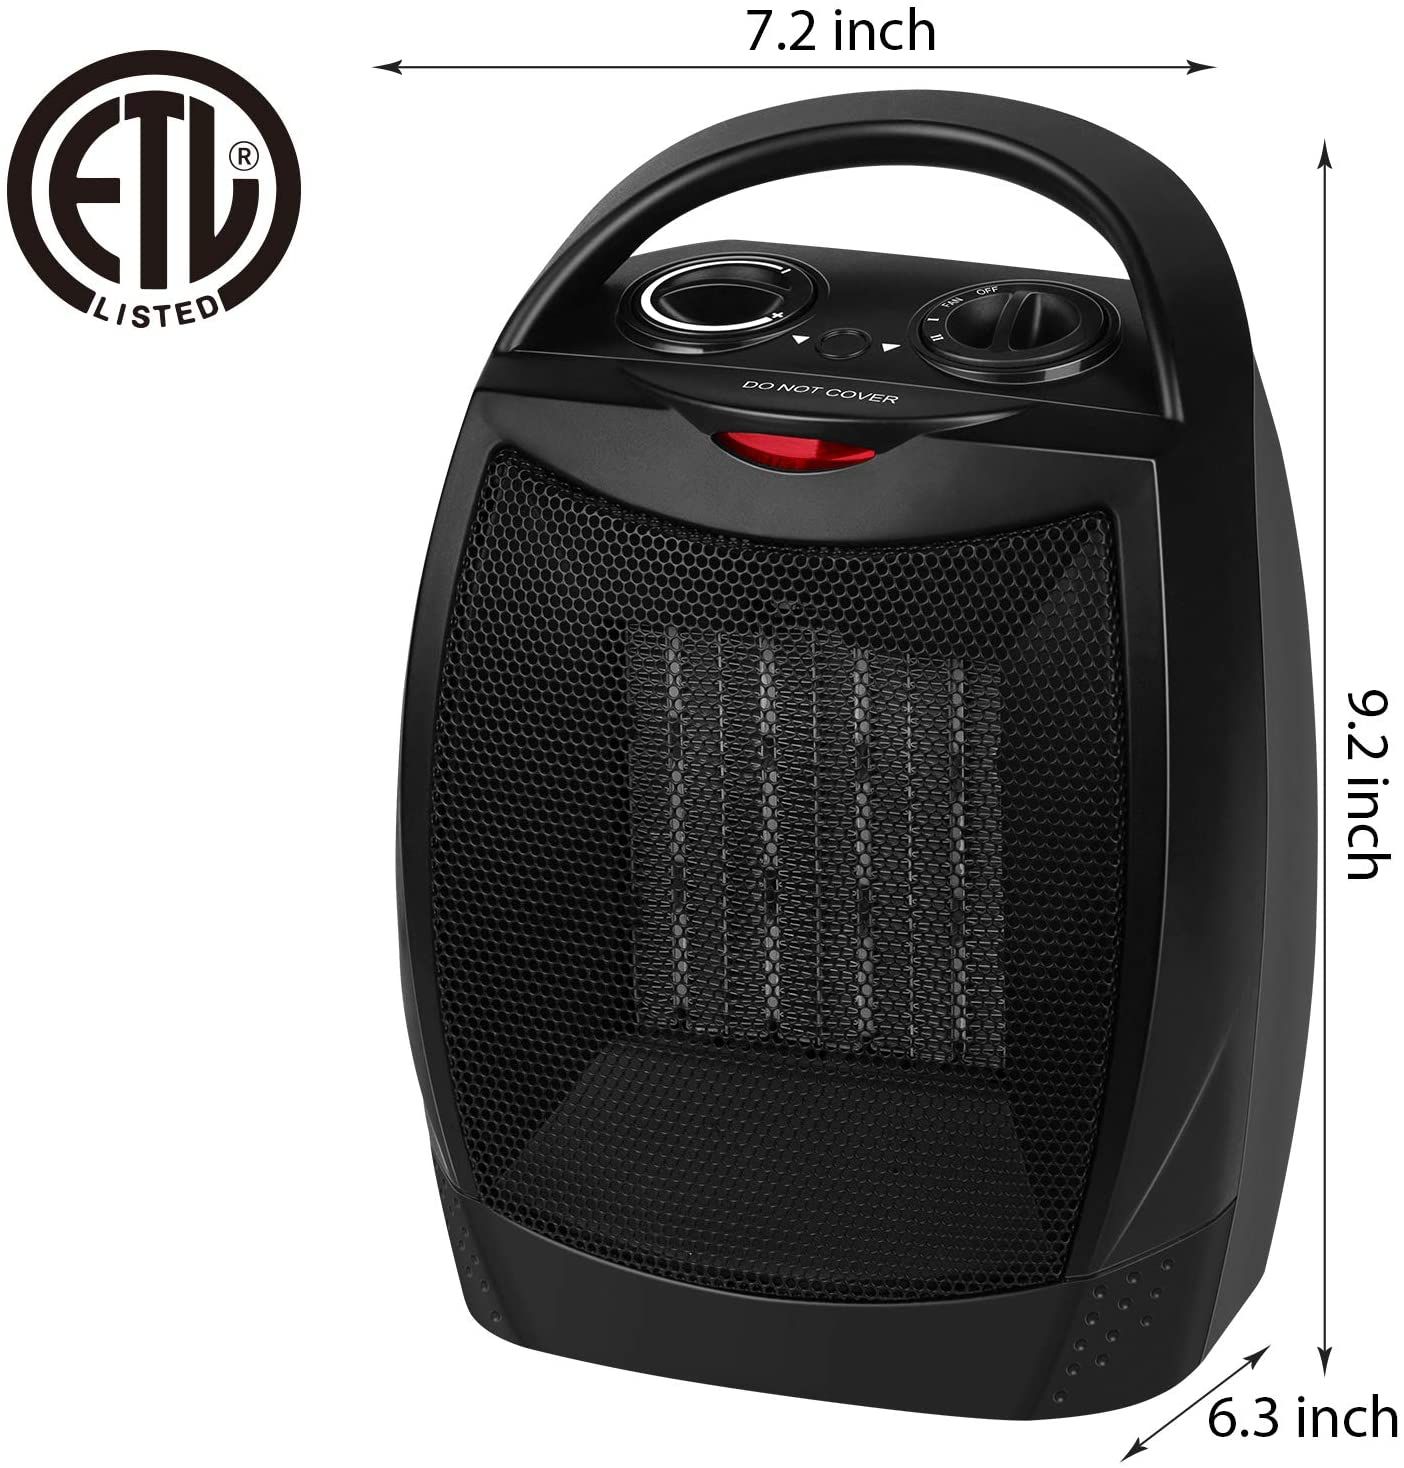 GiveBest Portable Electric Space Heater Design 3